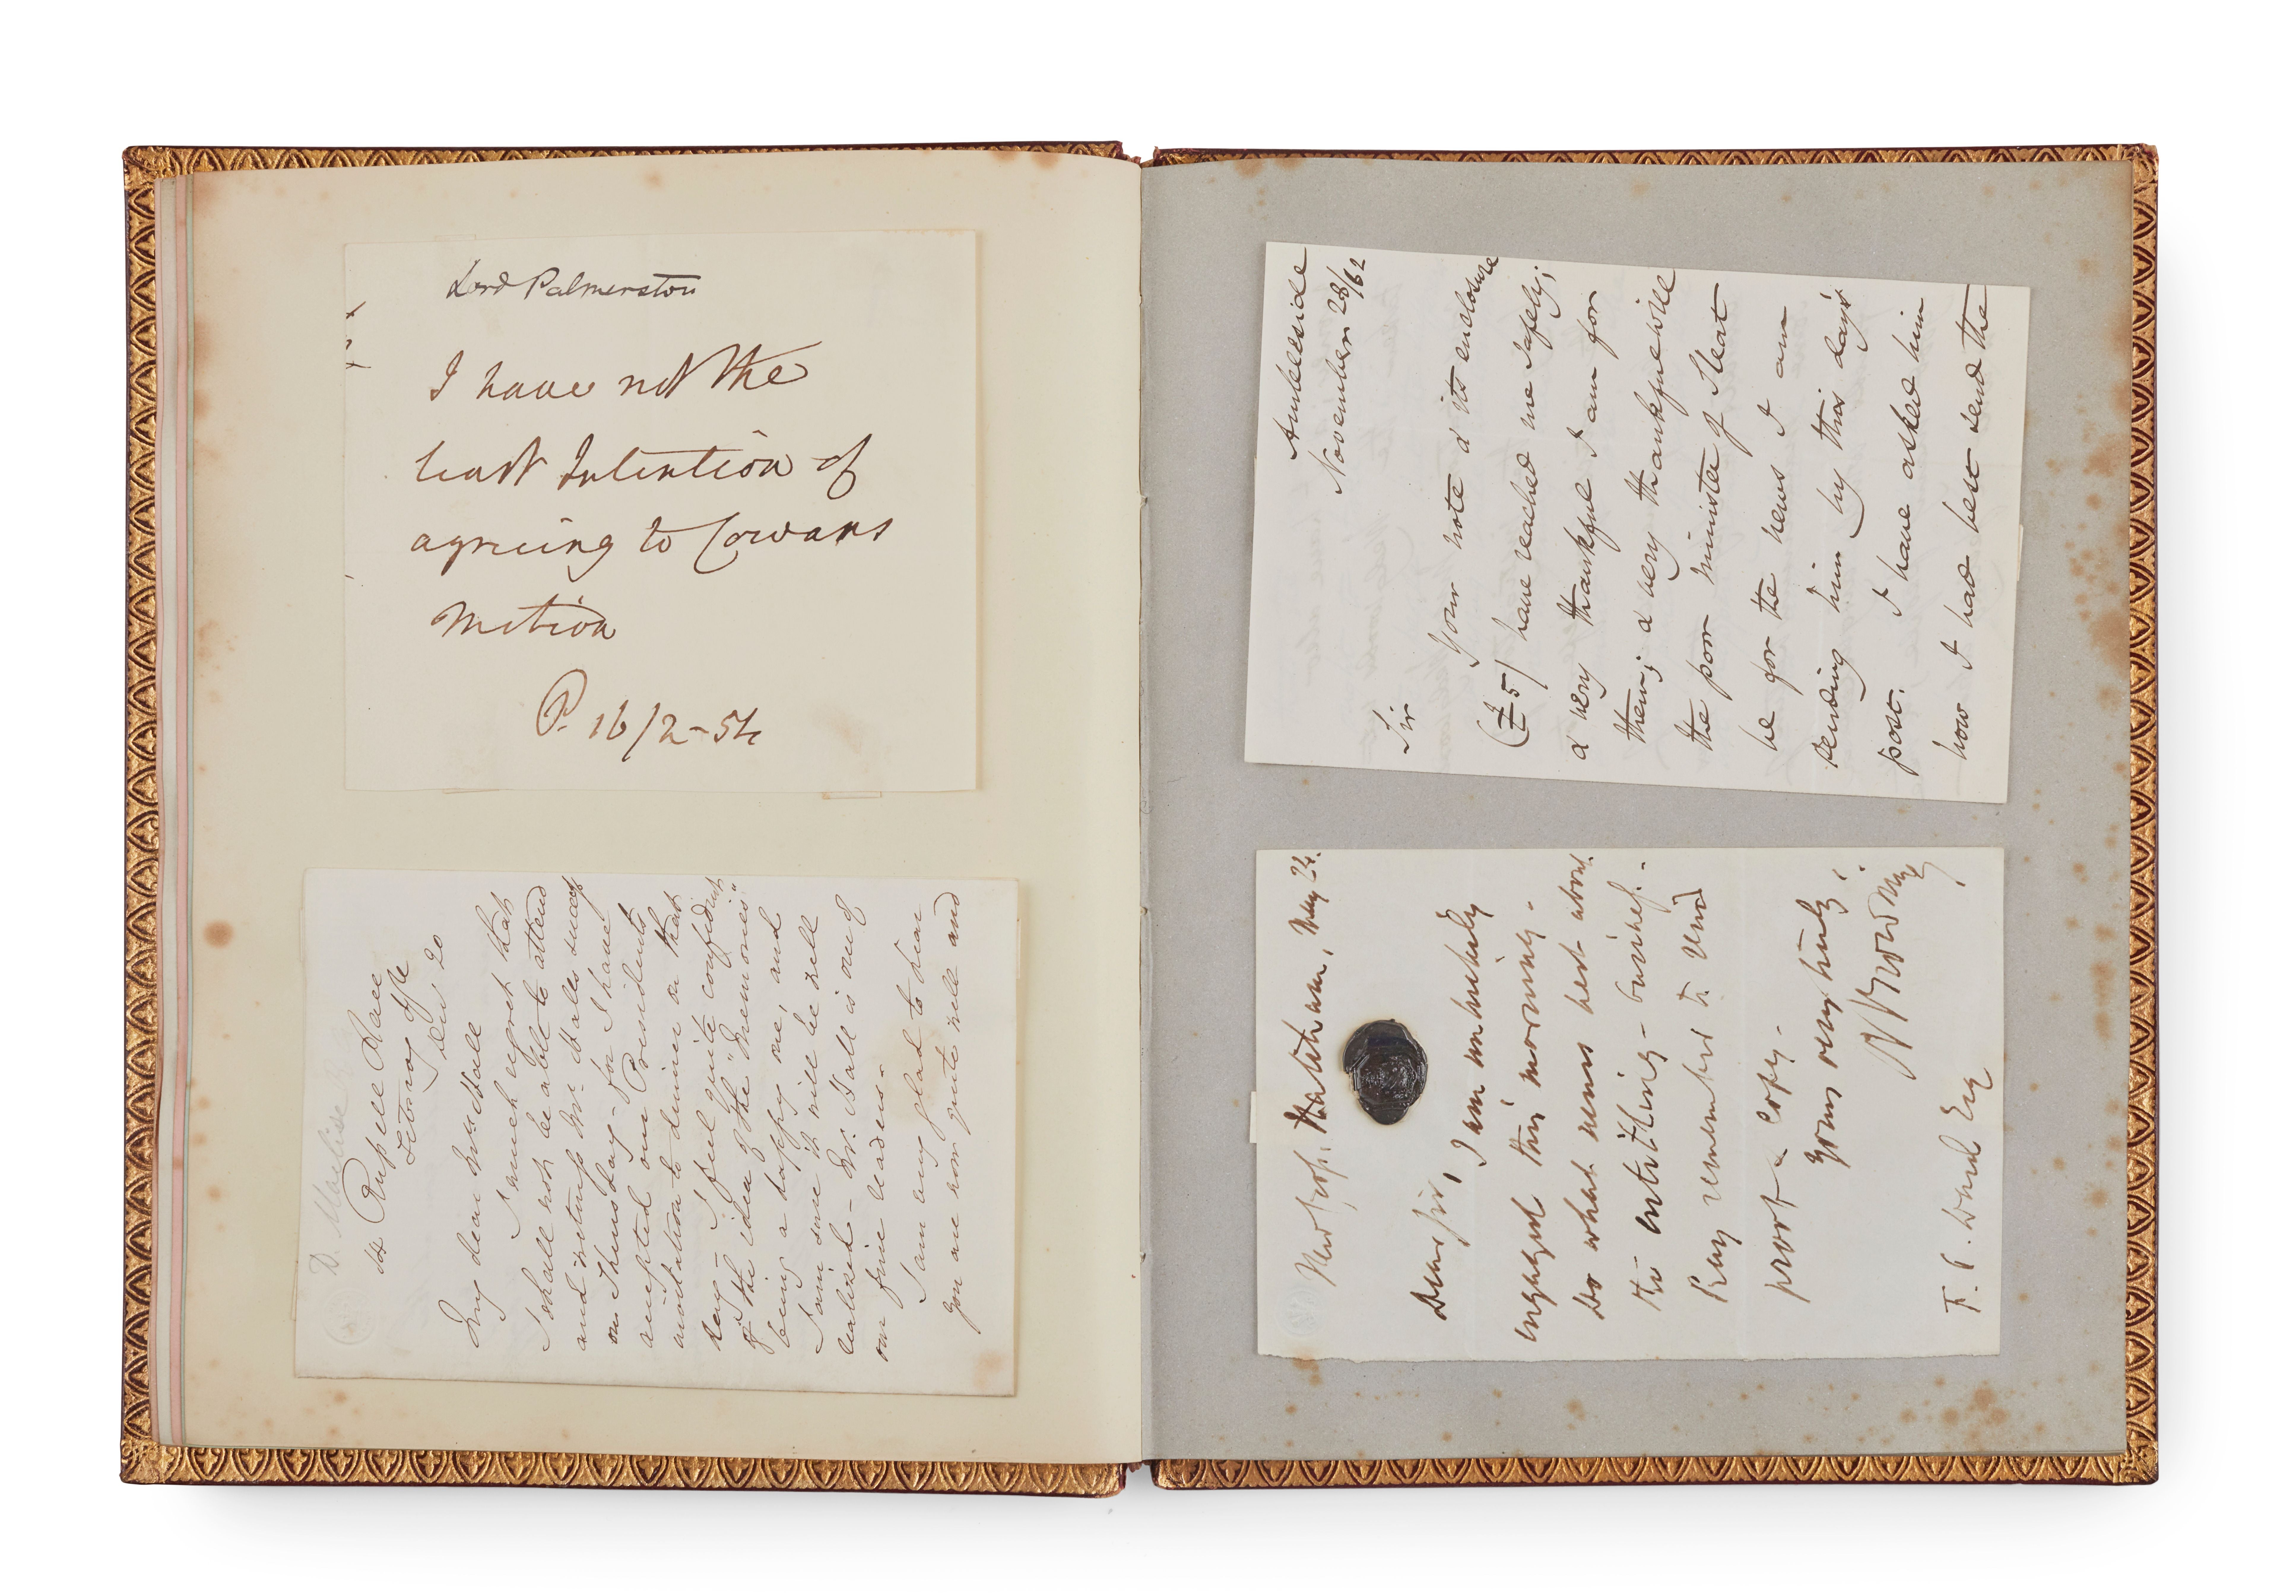 A collection of letters from well-known Victorian figures will also be sold. (Lyon & Turnbull/PA)